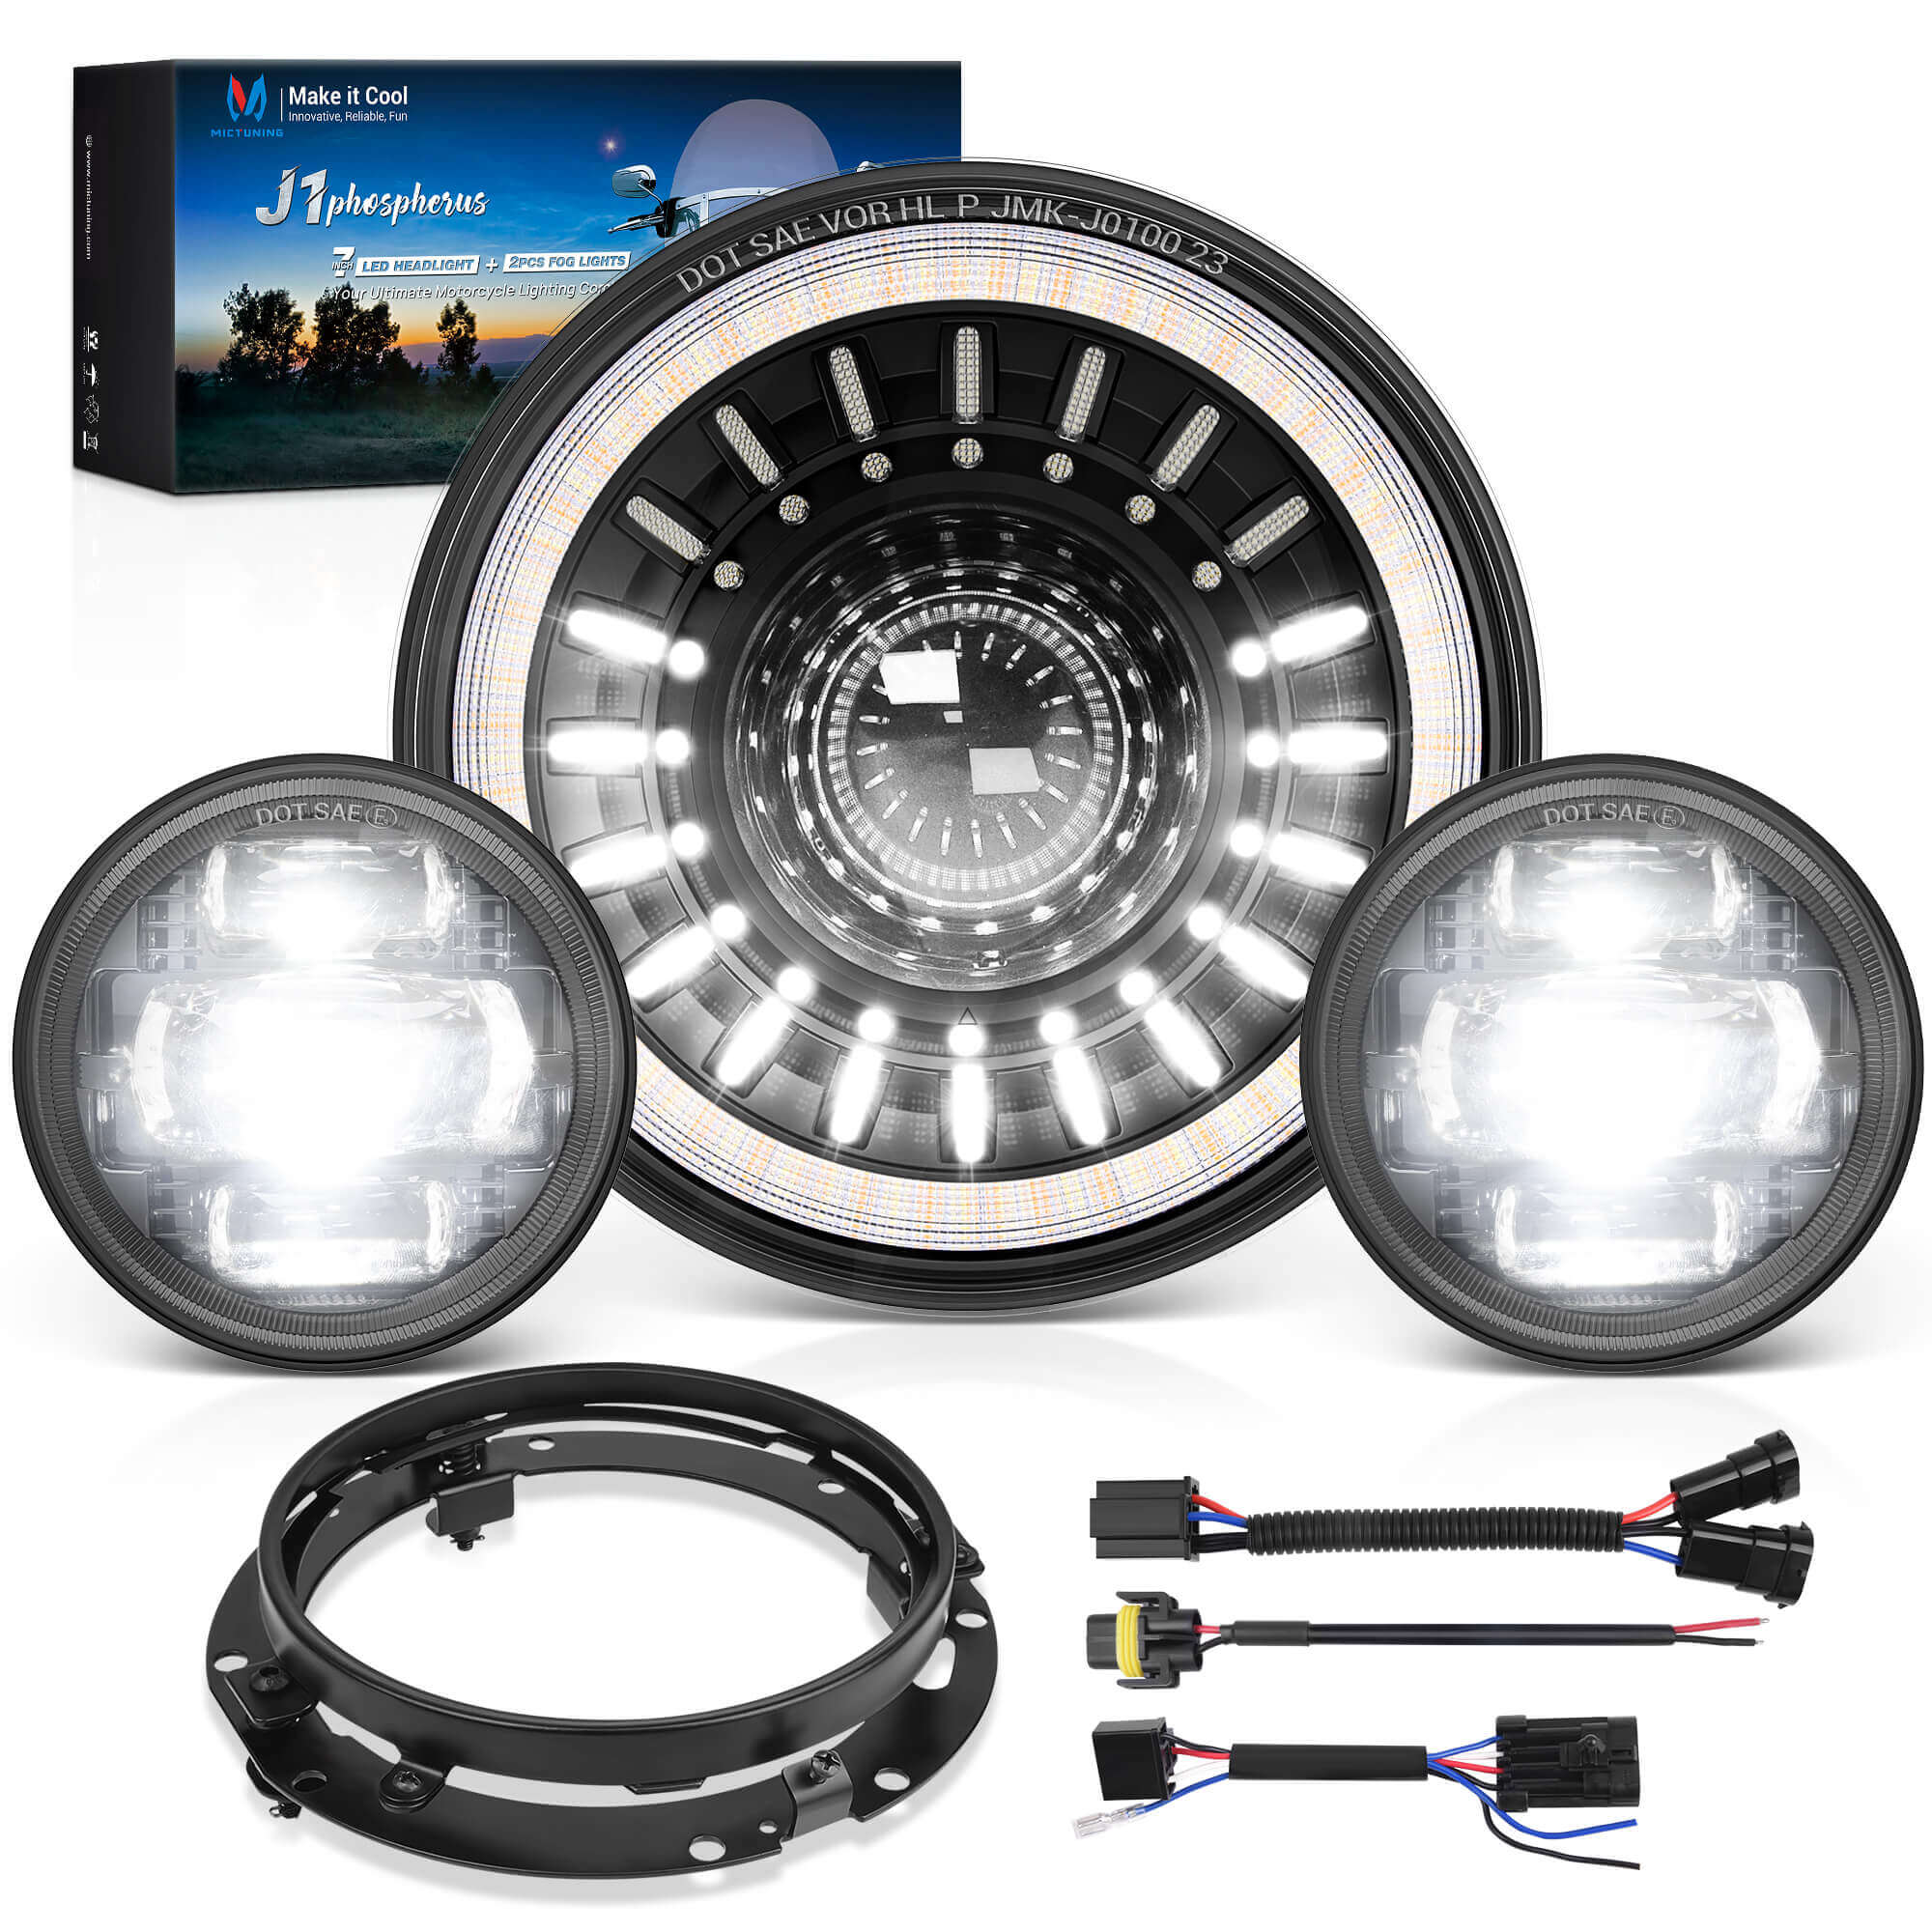 J1 7″ Motorcycle LED Headlight w/ 4.5″ Fog Lights Assembly, Head Lamp Kit, DOT Approved, Compatible with Electra Glide Road King Softail